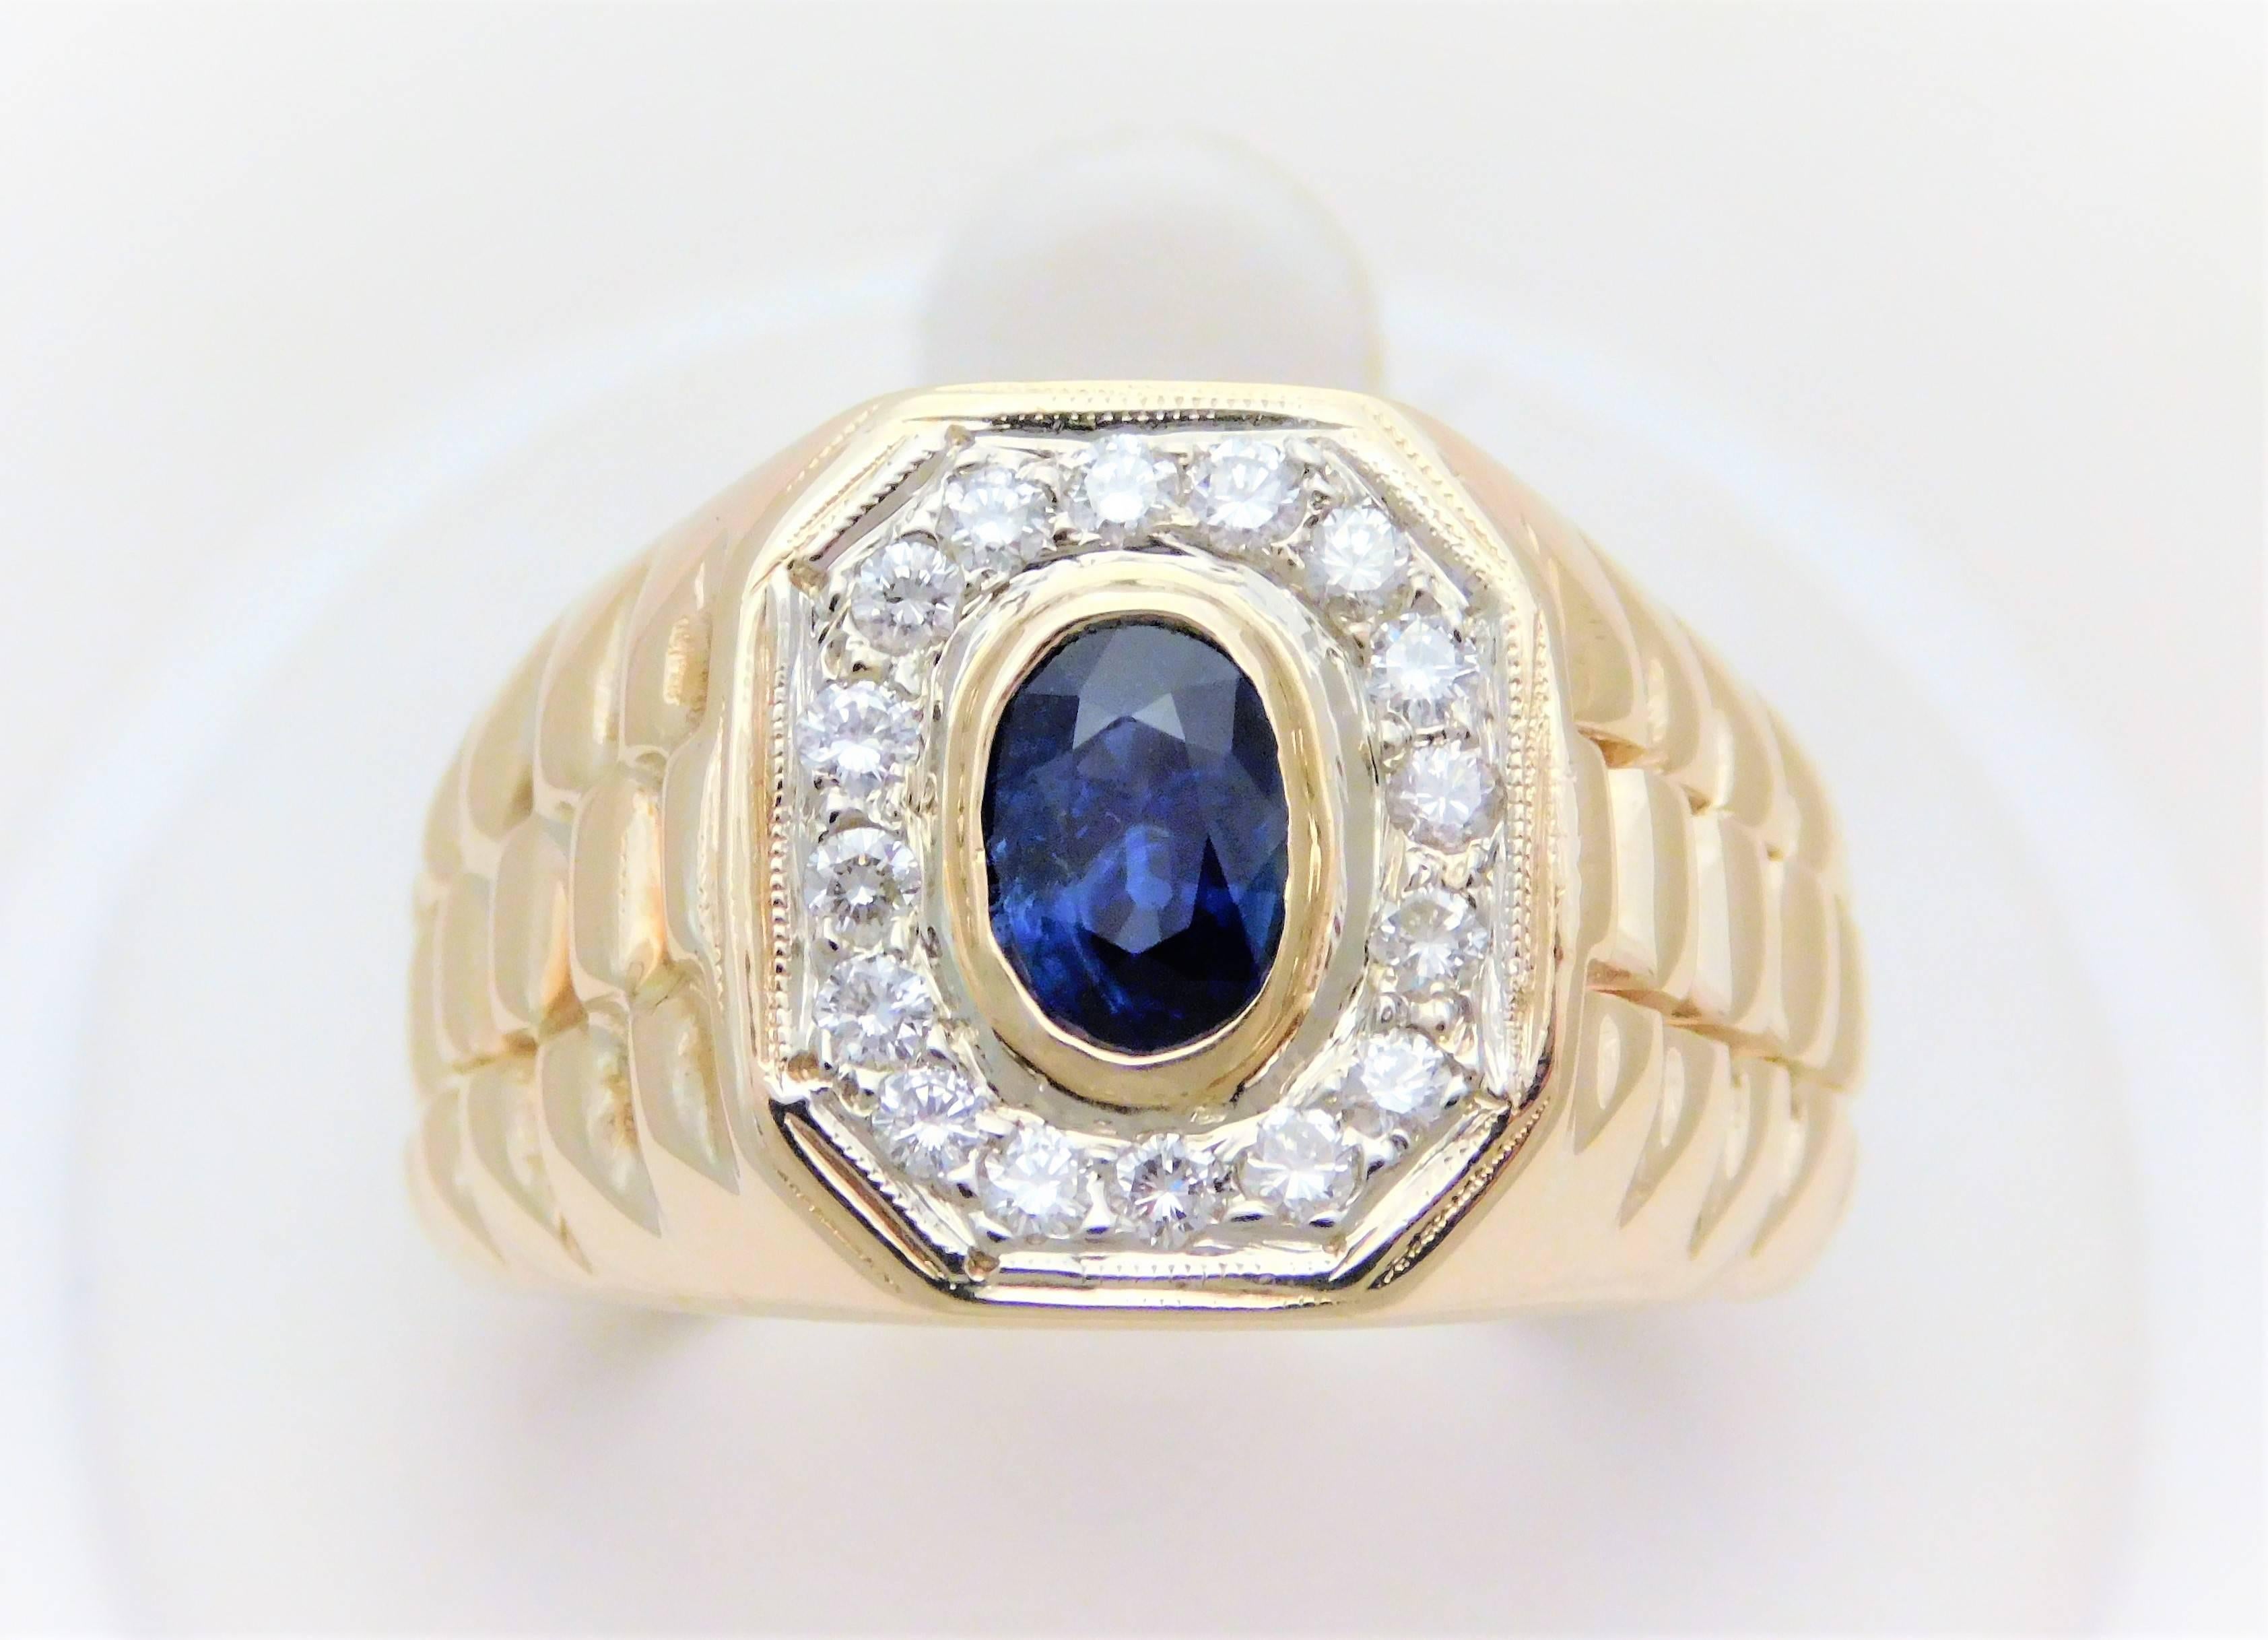 Gents Stately 14 Karat Gold Diamond and Ceylon Sapphire Ring In Excellent Condition For Sale In Metairie, LA